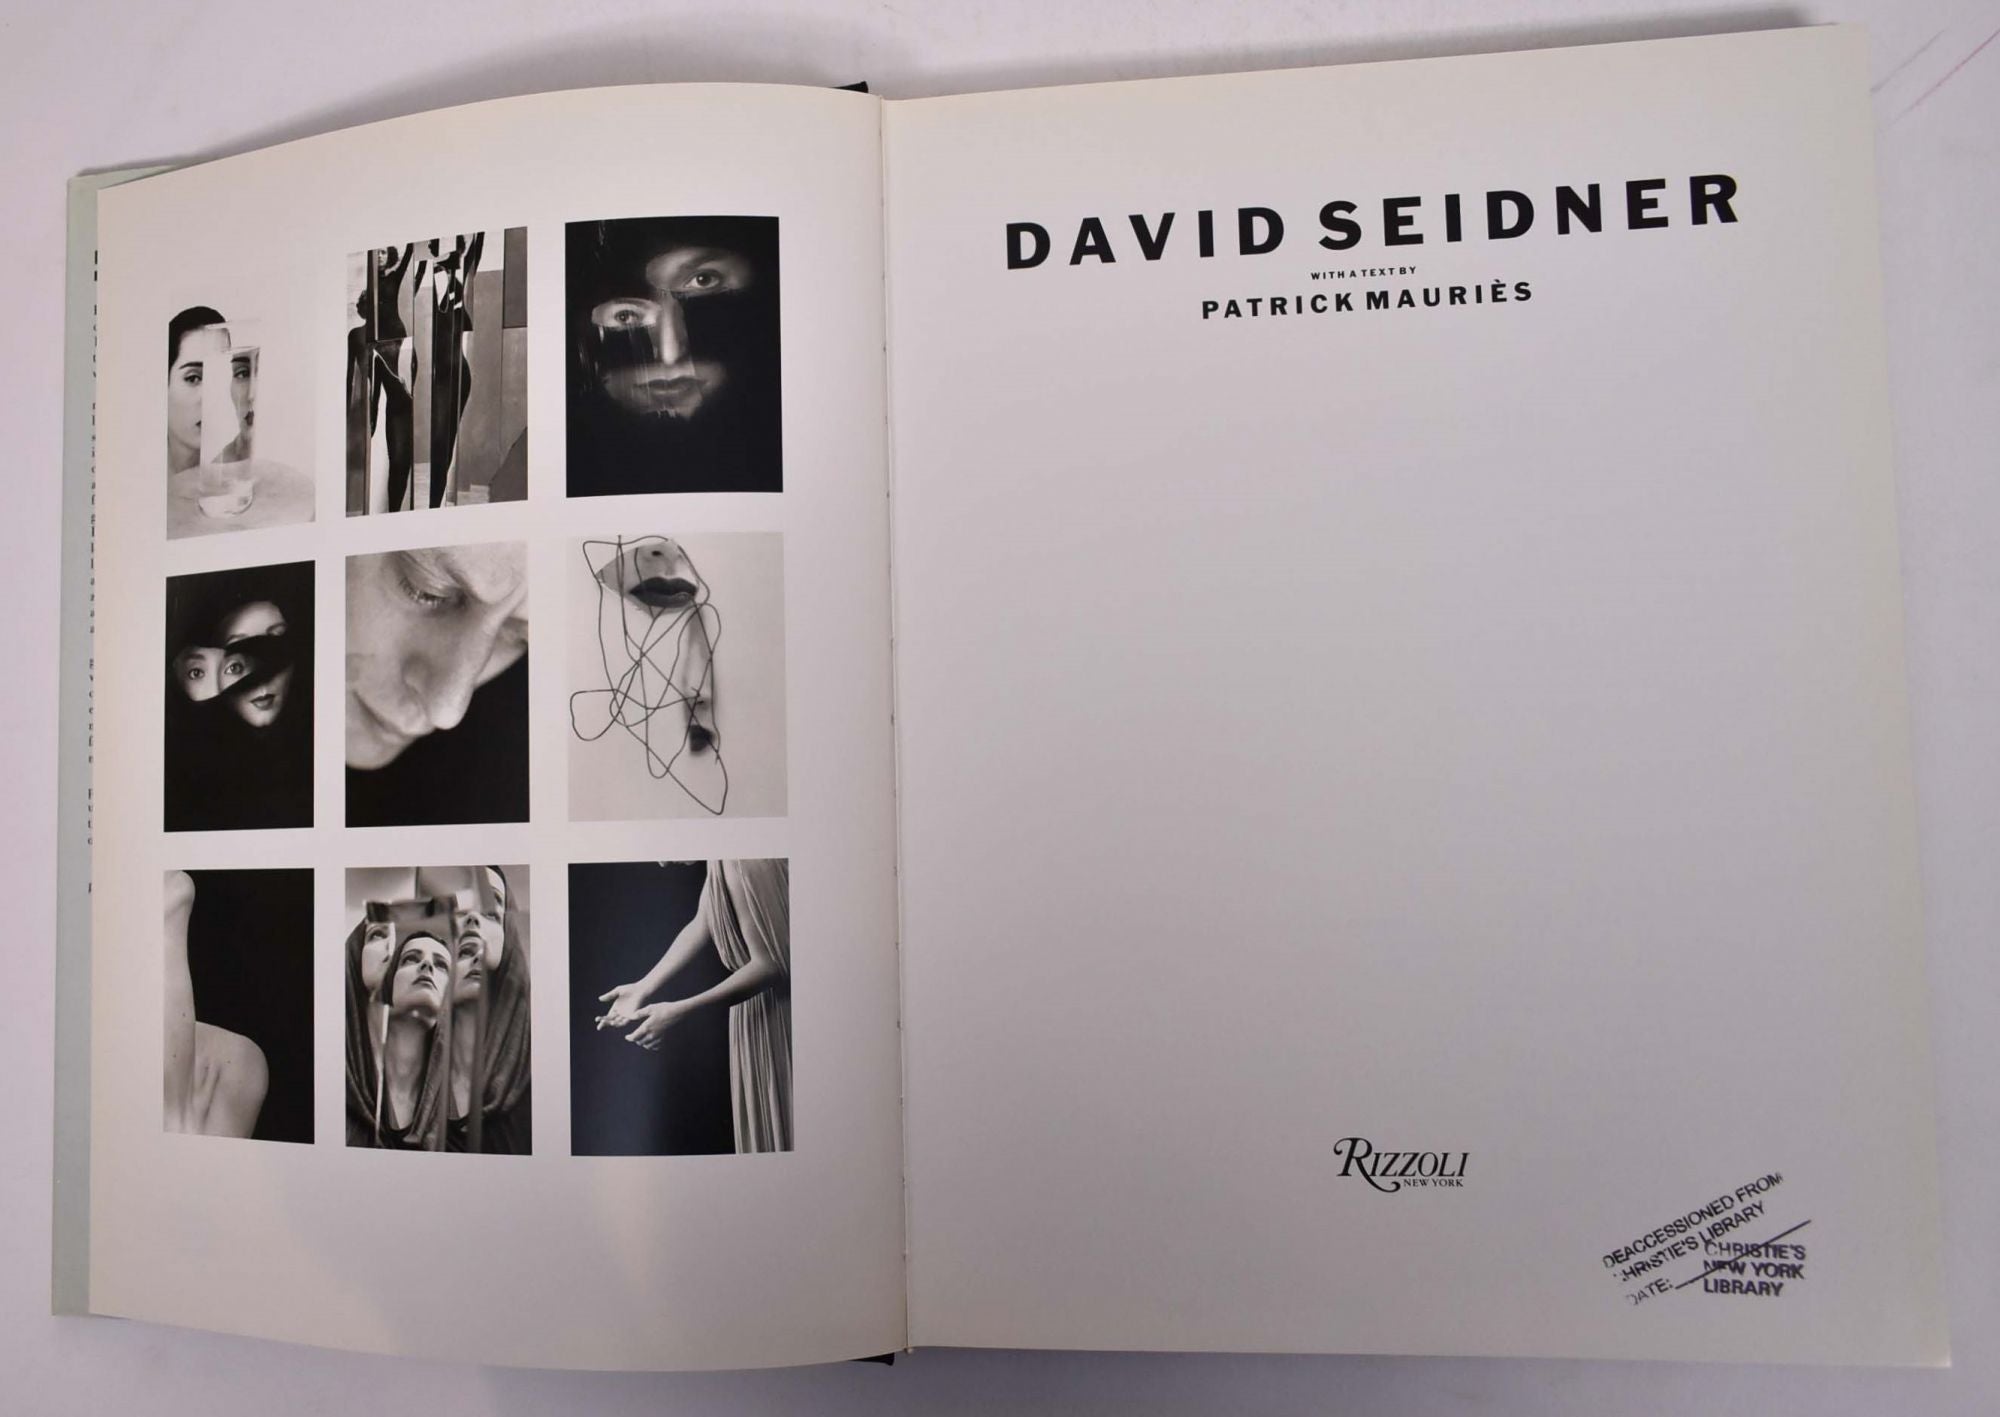 David Seidner by Patrick Mauries on Mullen Books